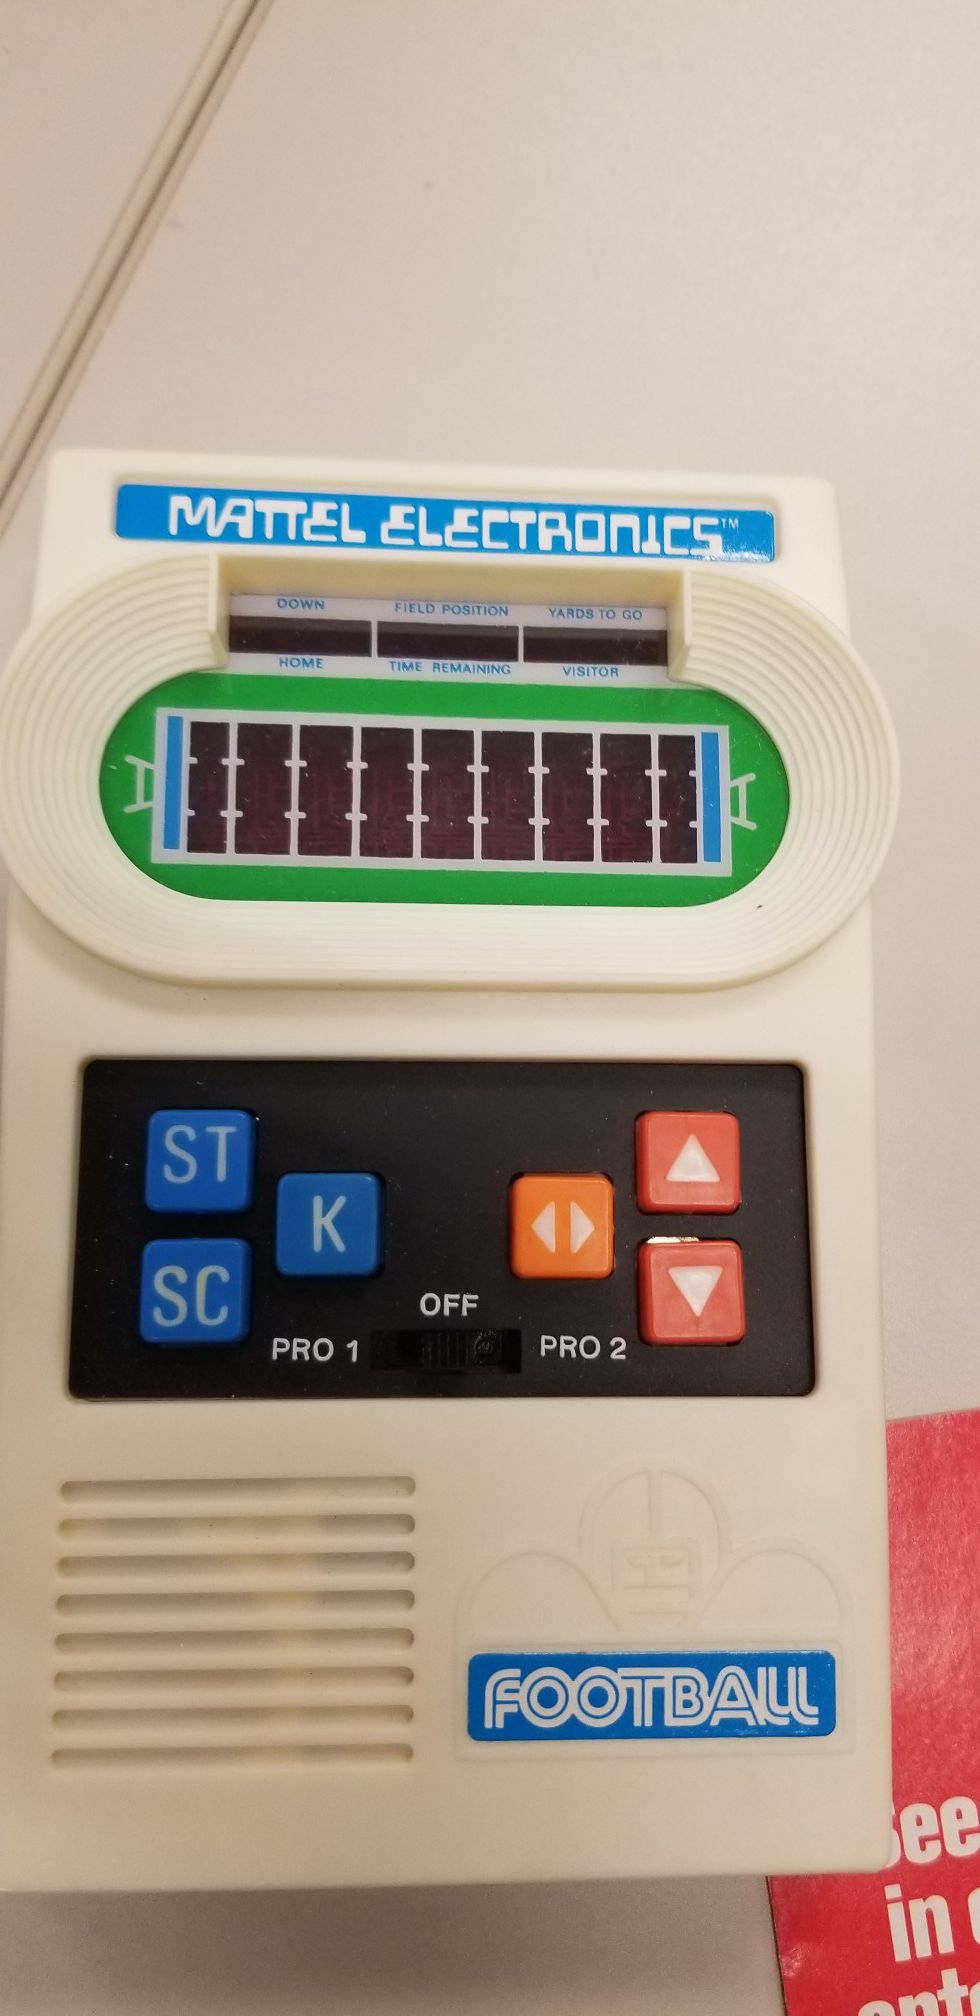 Mattel 1977 Electronics Football game with box and instructions